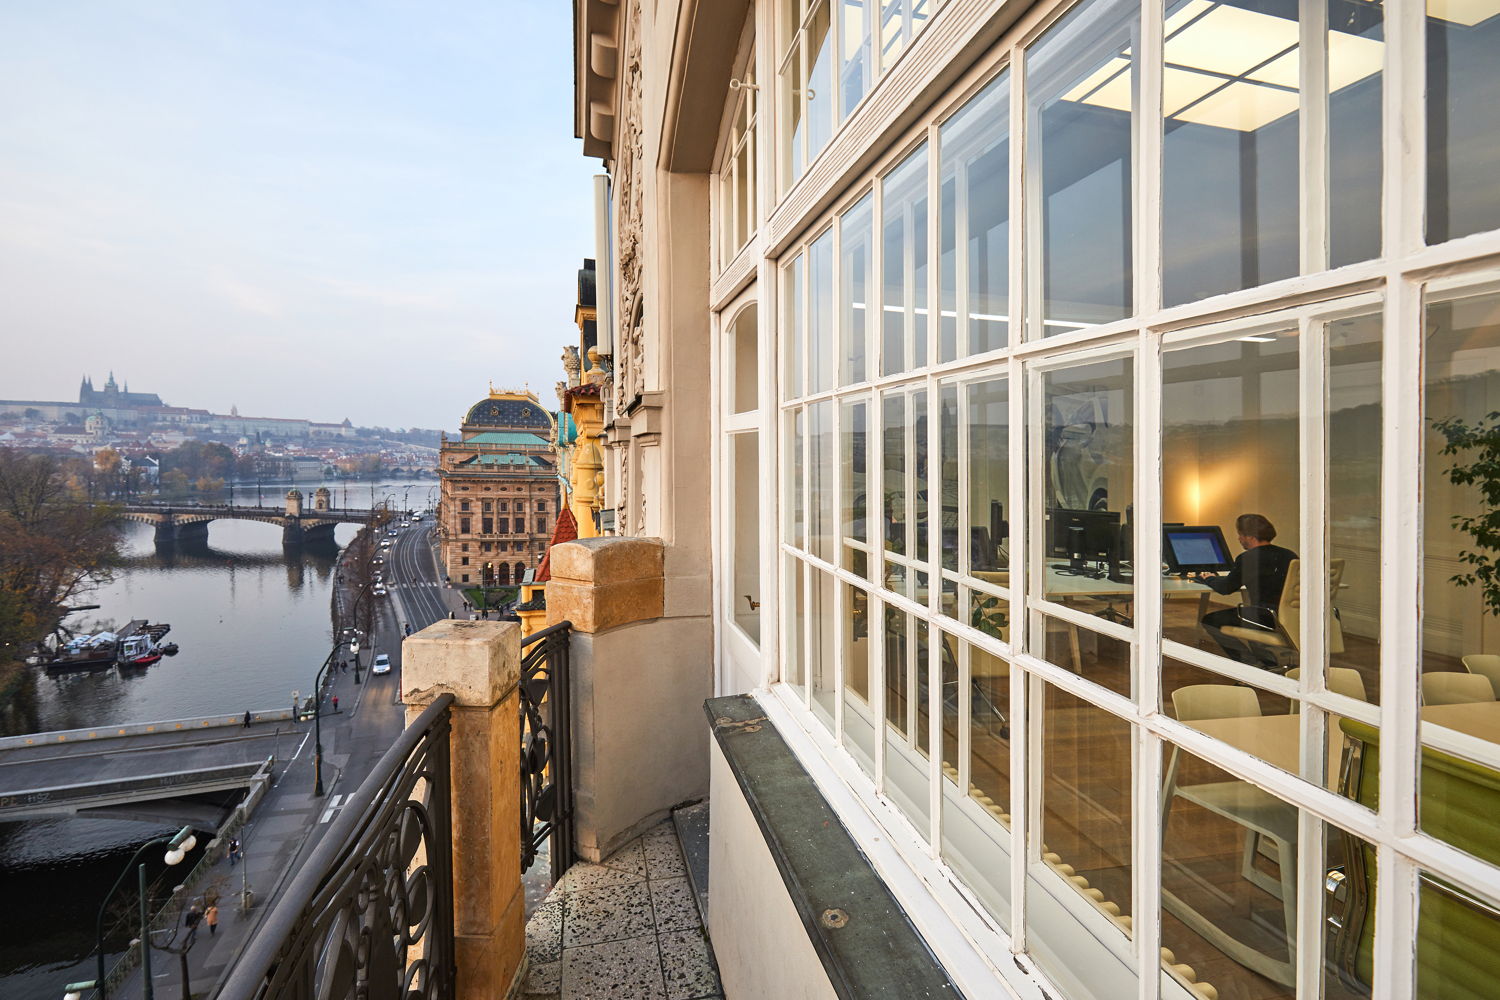 Located in the heart of the Czech capital, Prague, not far from Prague Castle, Charles Bridge, the dancing house and Žofín Palace. The first designs for future ŠKODA models are also created in the inspiring environment and atmosphere of the Prague Art-nouveau building on Masarykovo nábřeží.